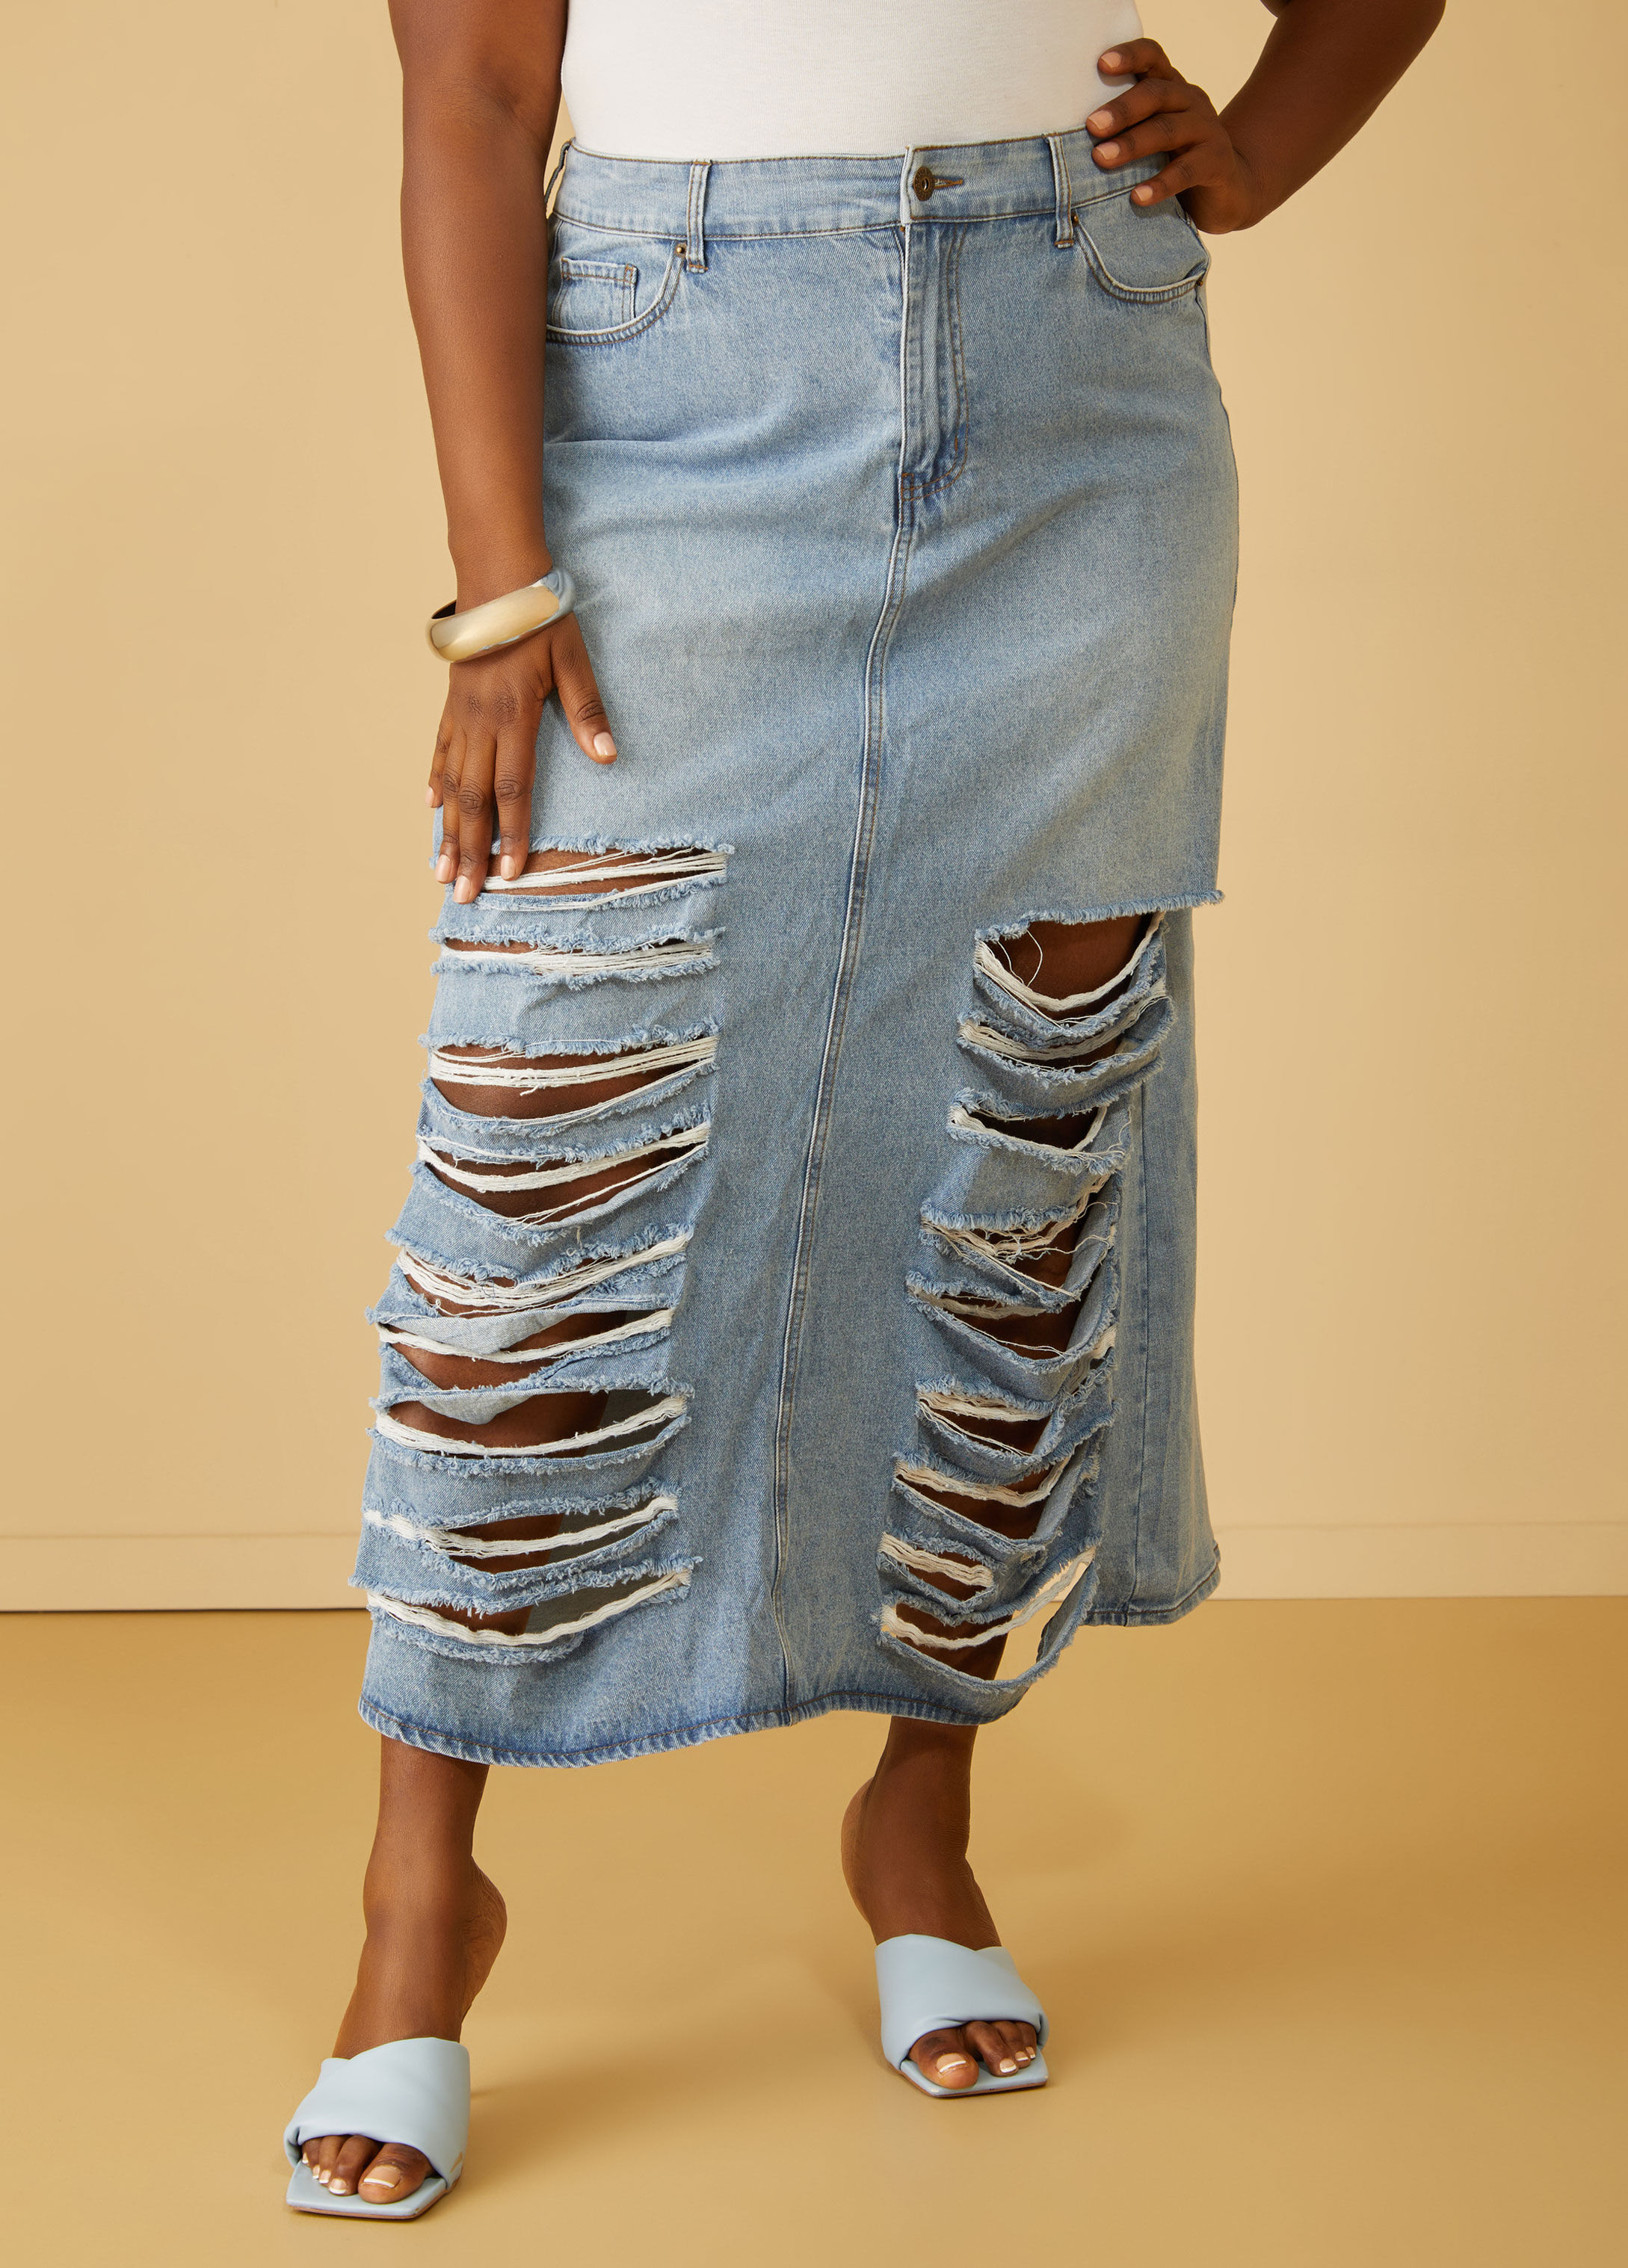 The Izzy Distressed Denim Overall Shorts – Style Trolley